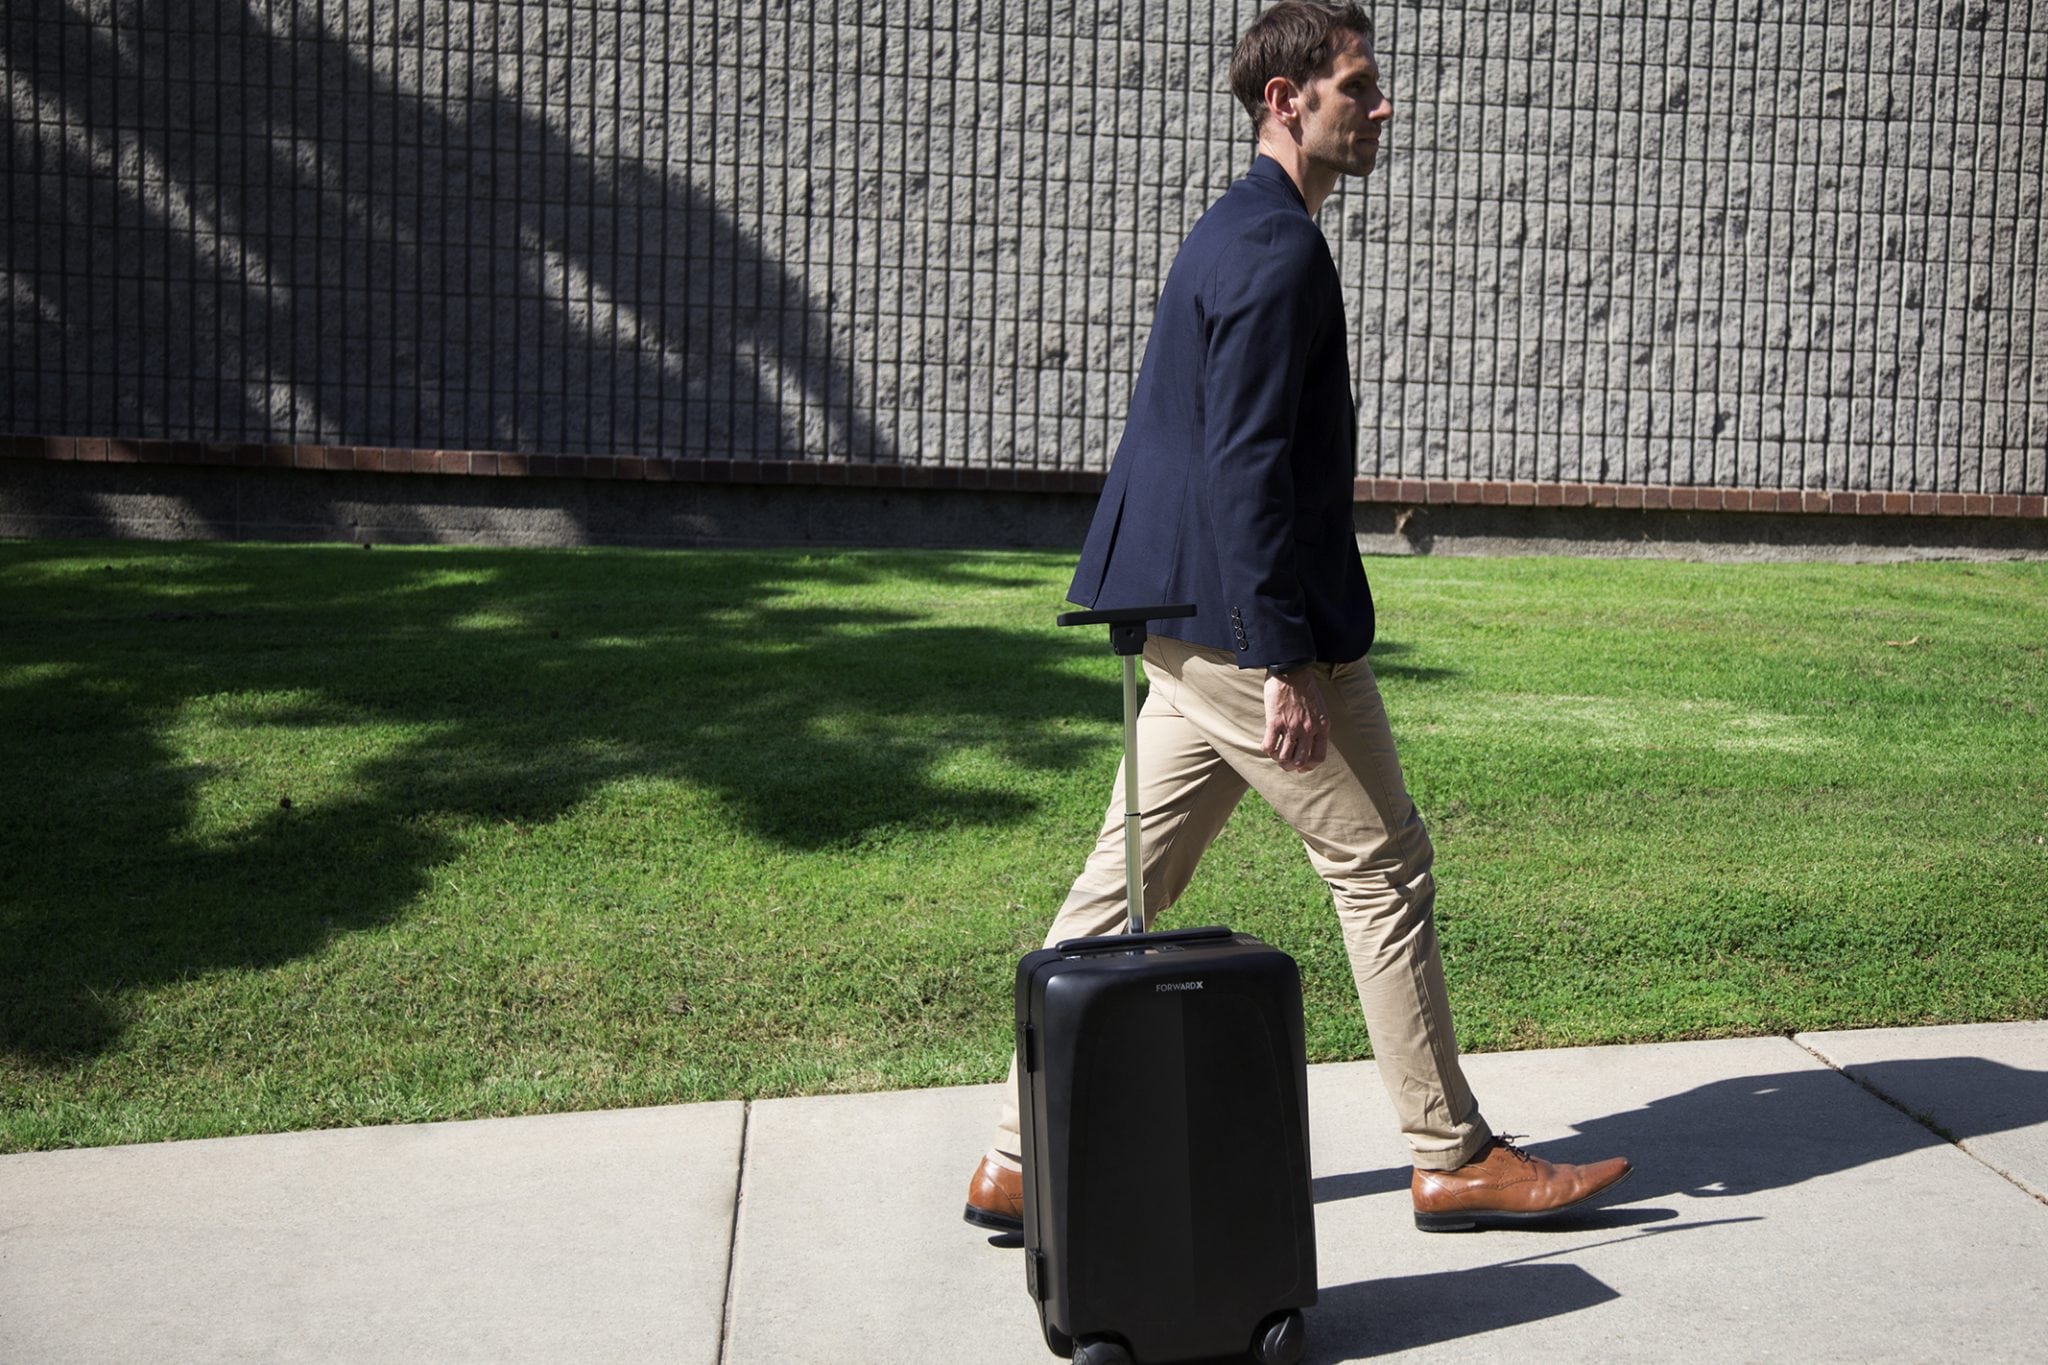 ForwardX Robotics has invented luggage that follows you around thanks to sensors, motors, and a battery. The manufacturer is one of several companies that received funding this week.